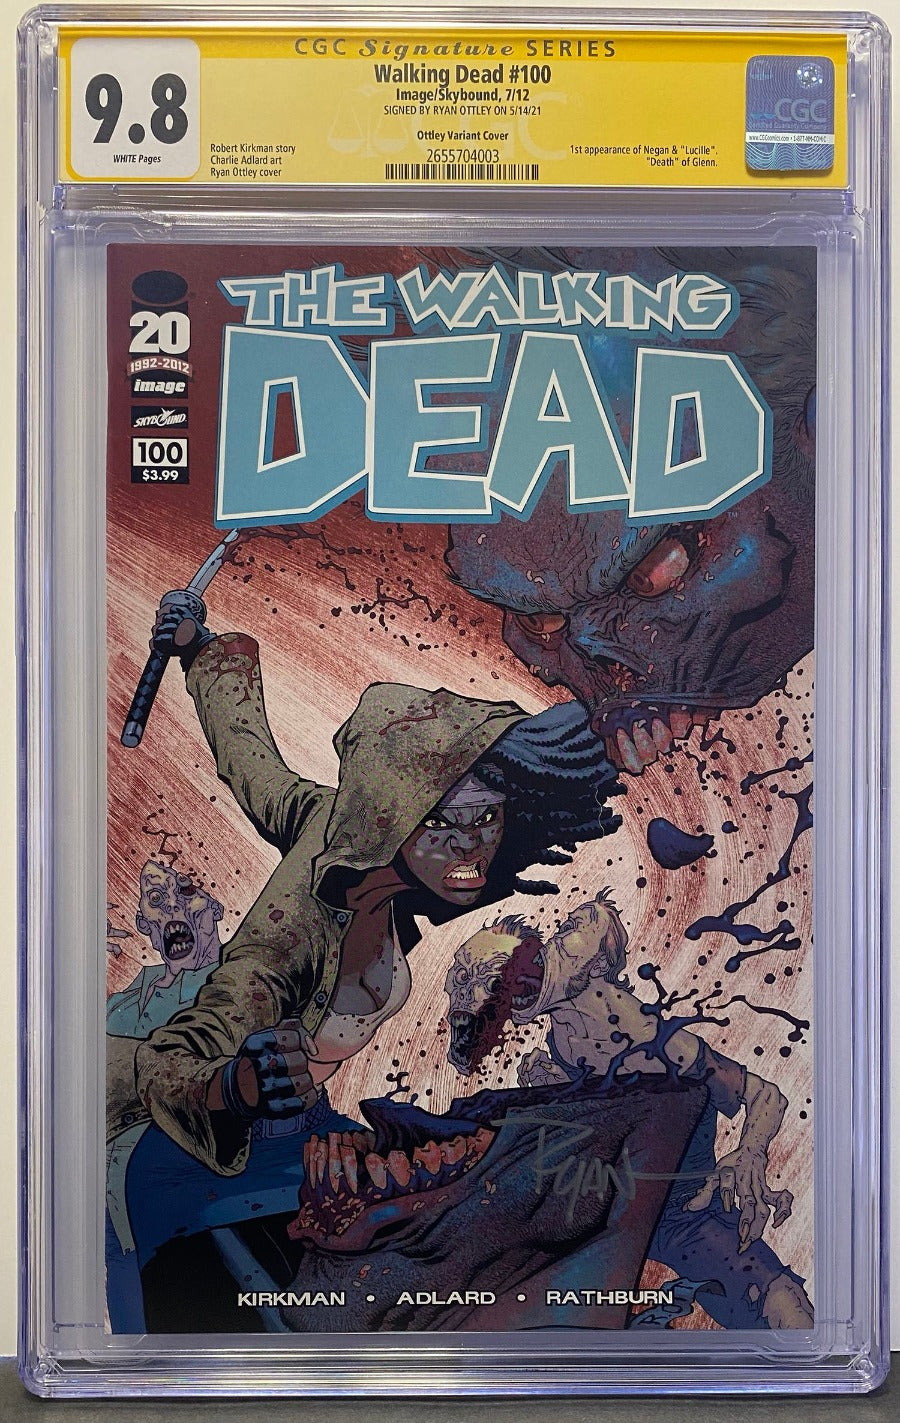 CGC SIGNATURE SERIES 9.8 - THE WALKING DEAD OTTLEY VARIANT